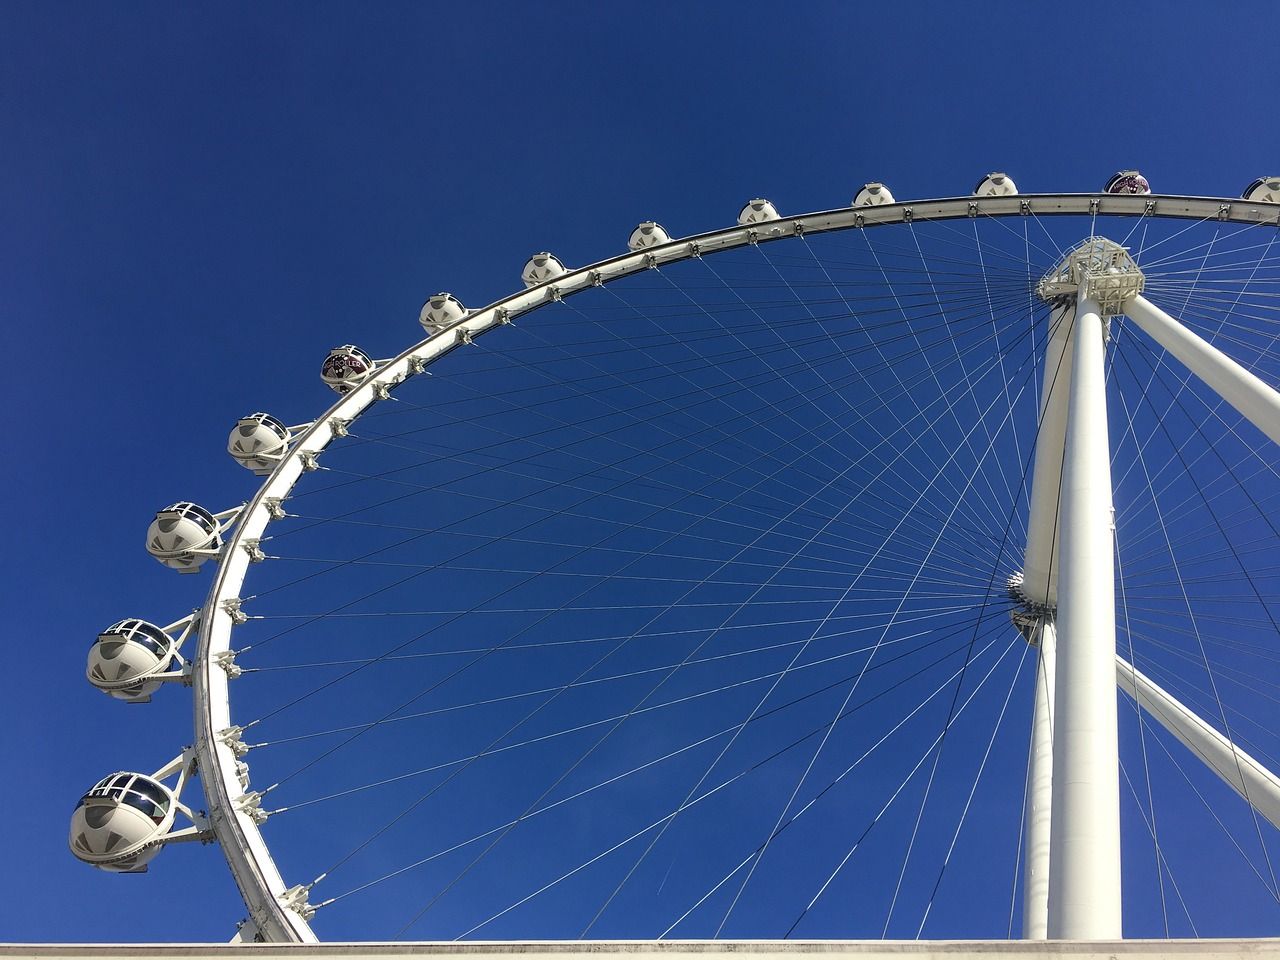 High Roller Observation Wheel at The LINQ